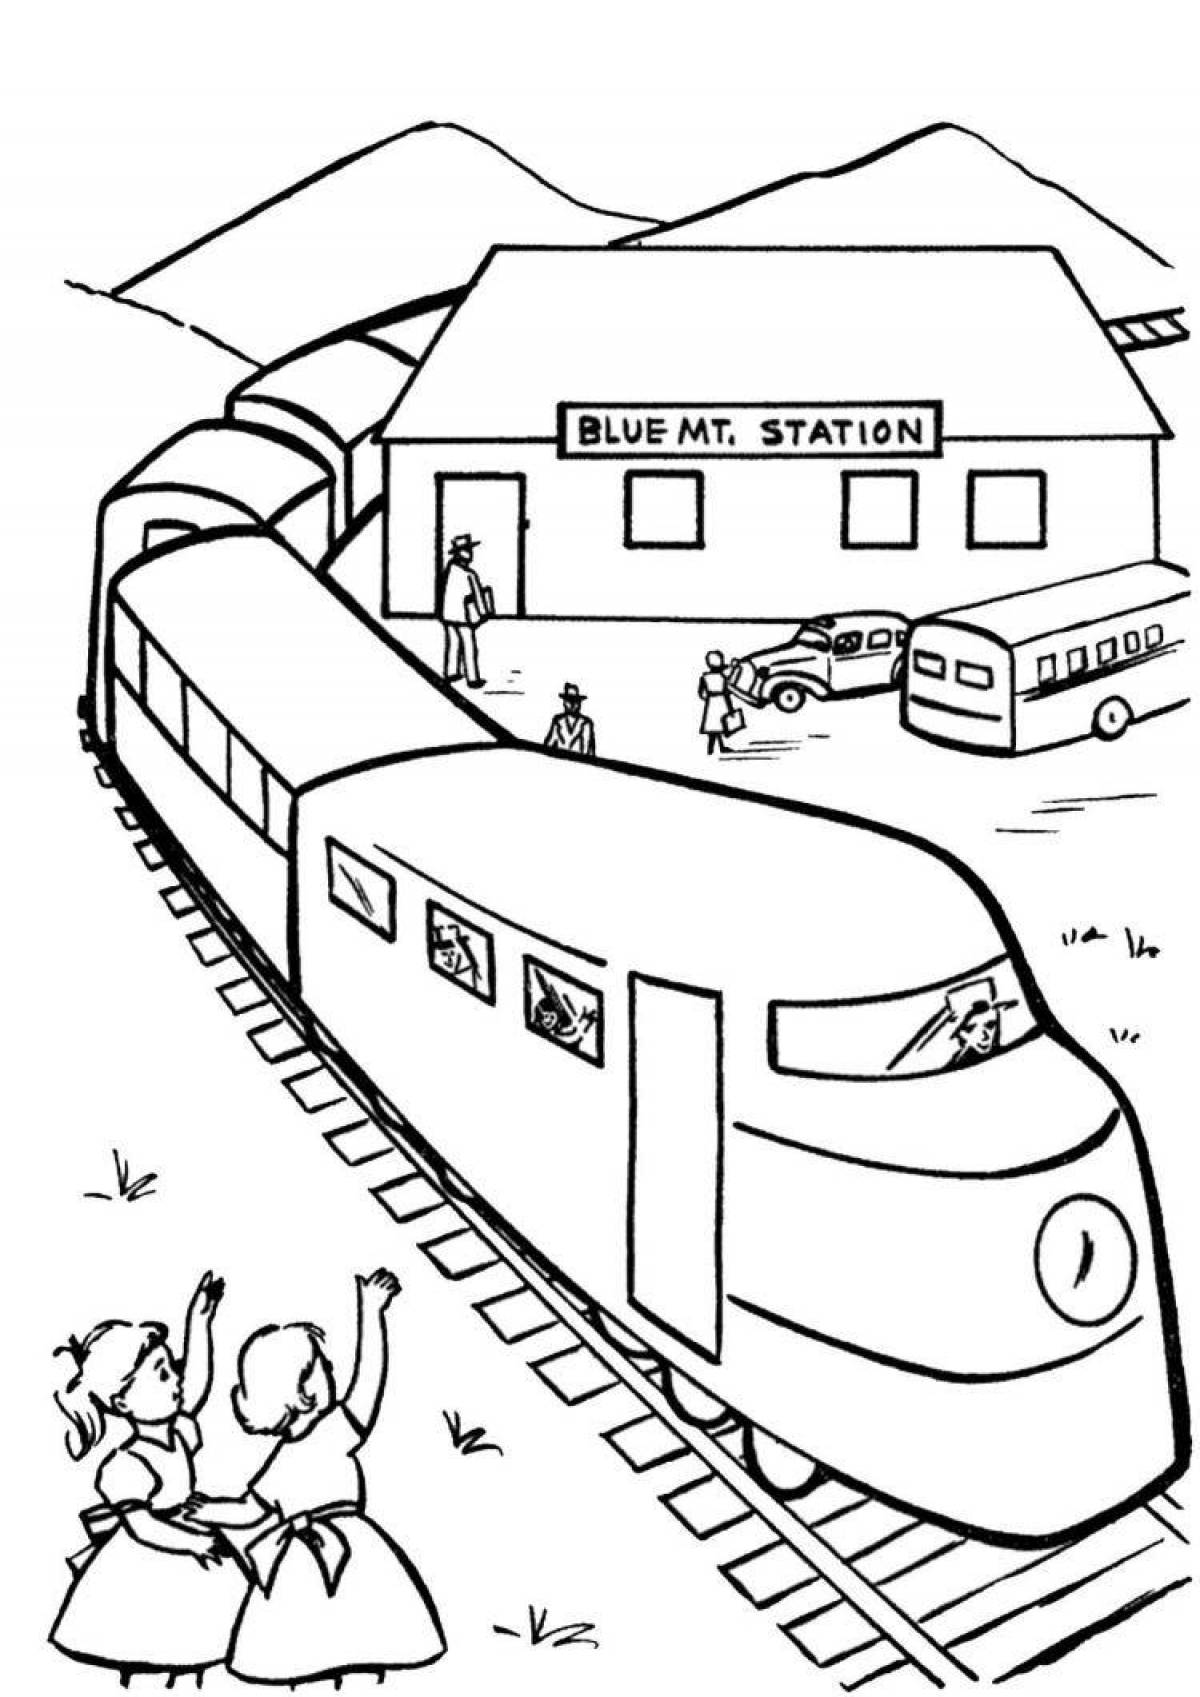 Adorable train station coloring page